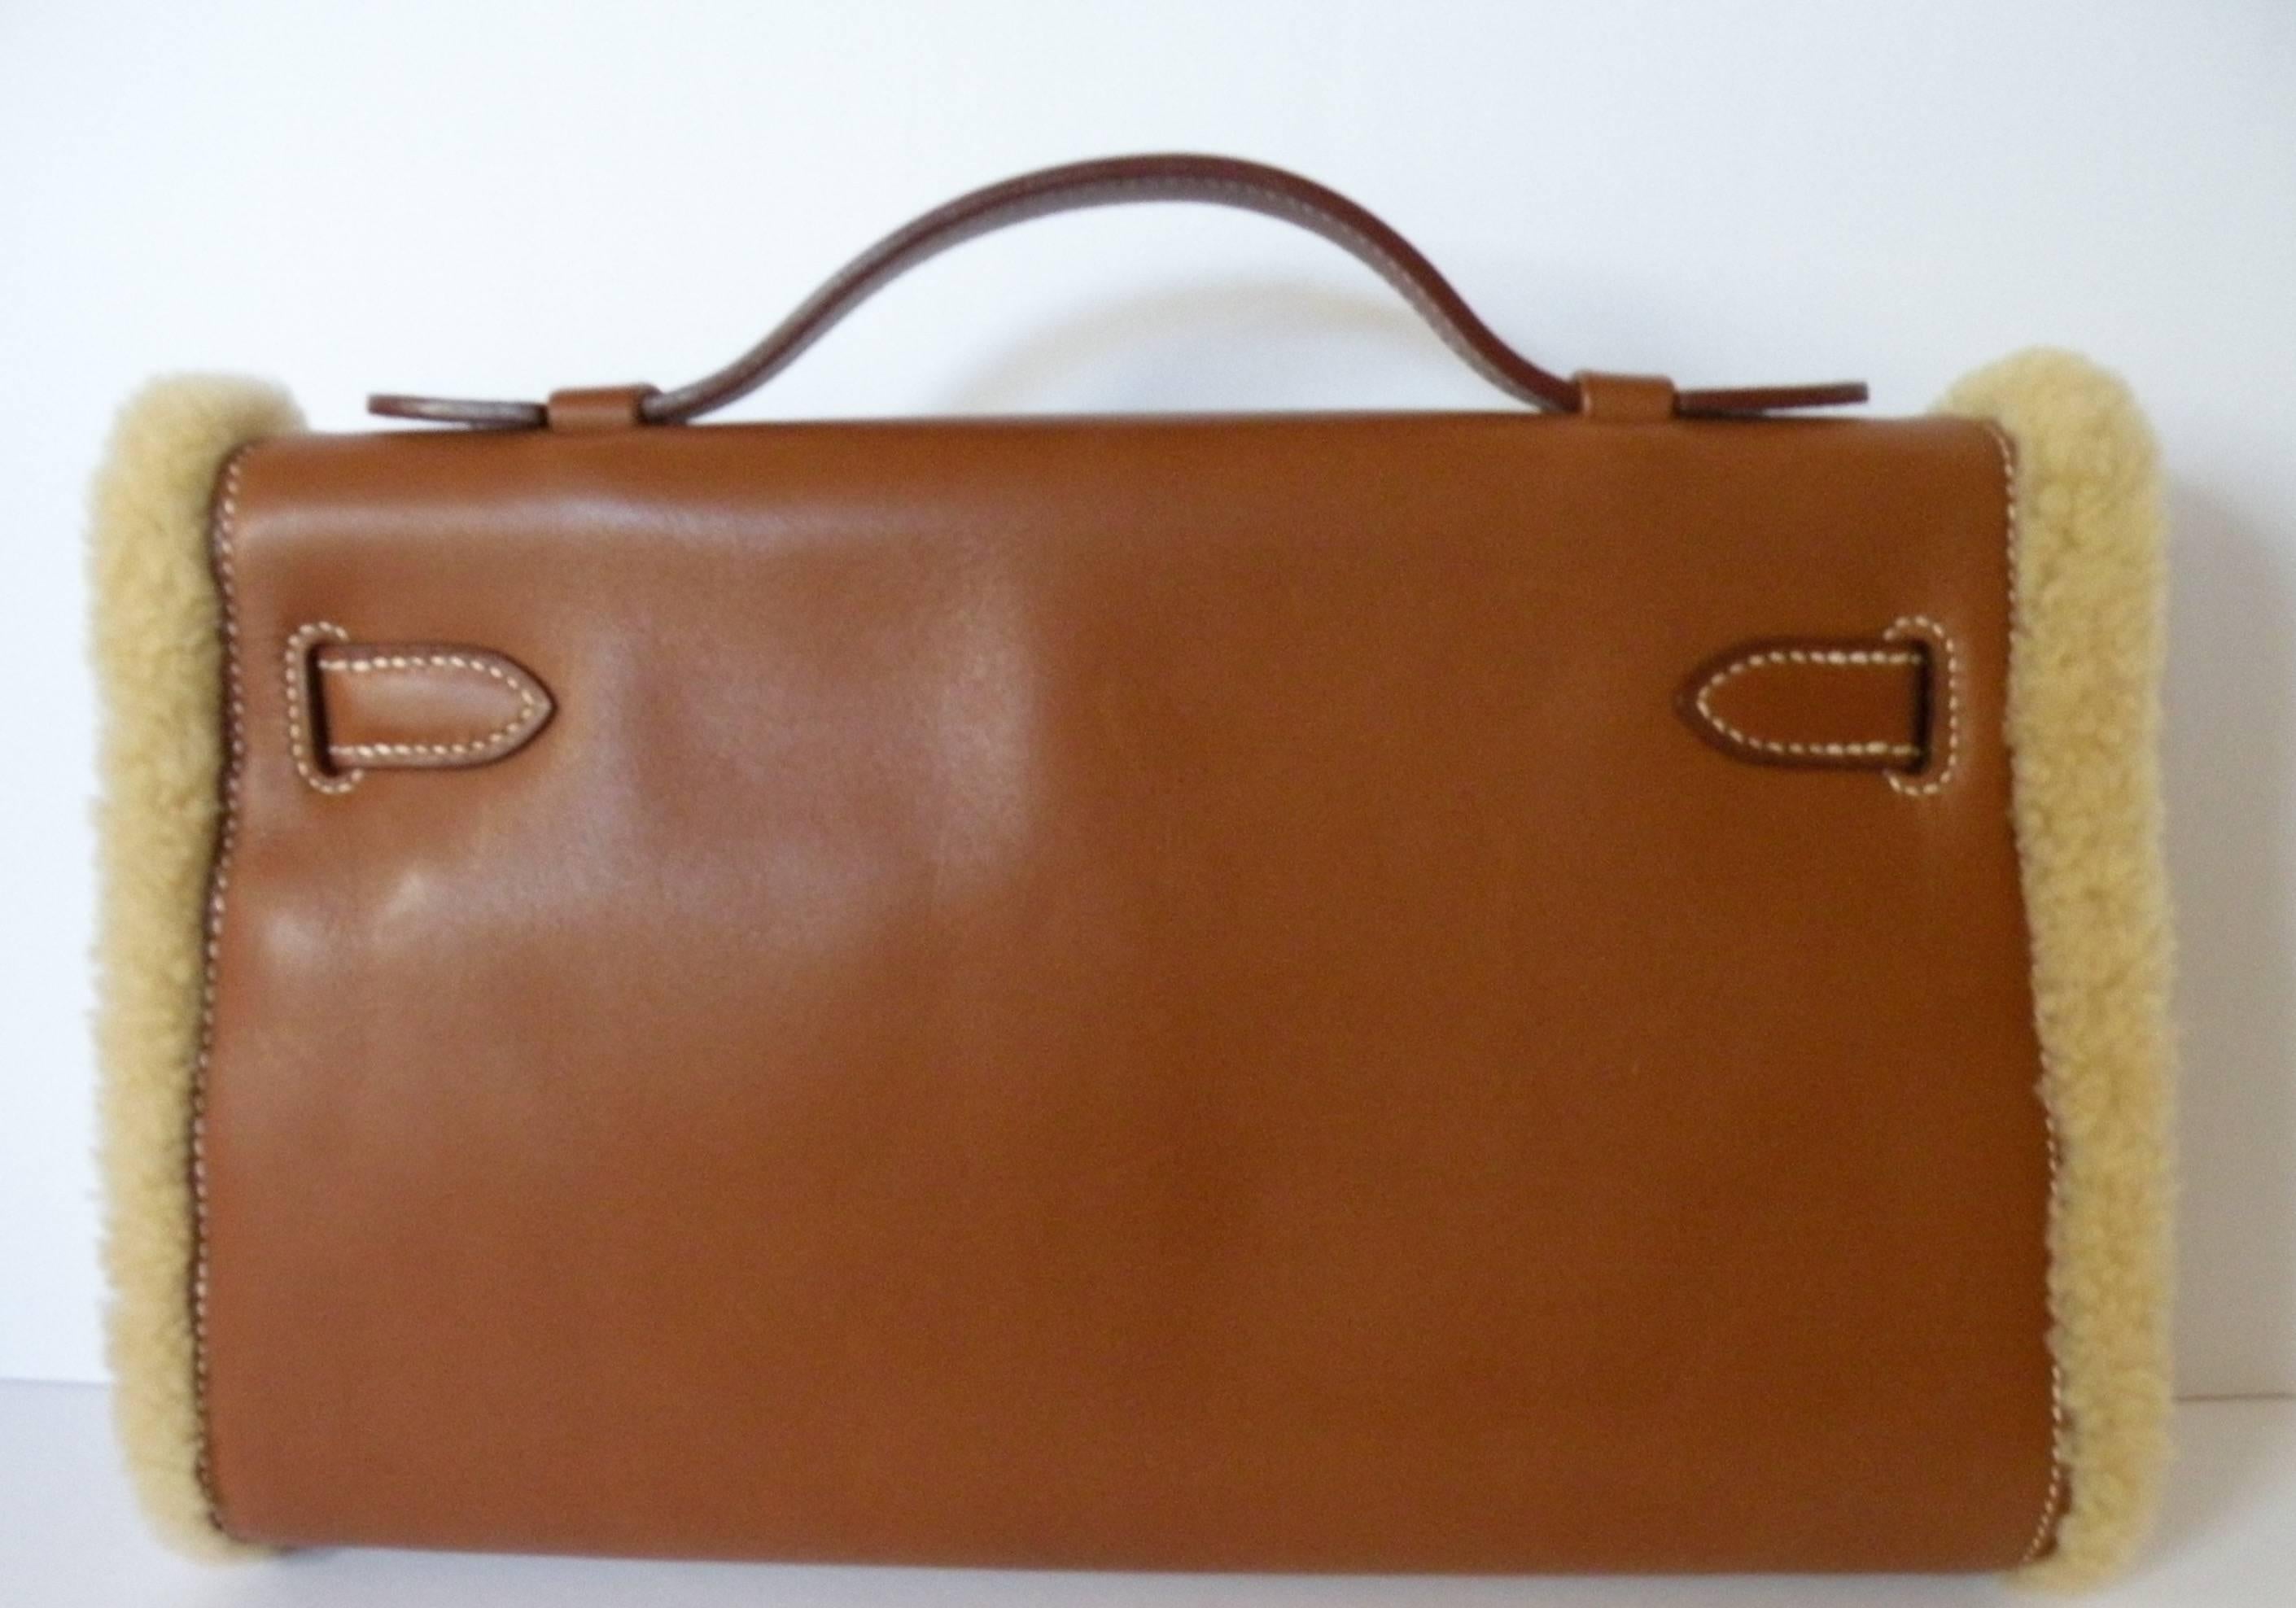 Hermes Teddy Plush Kelly Pochette Muff In Excellent Condition For Sale In West Chester, PA